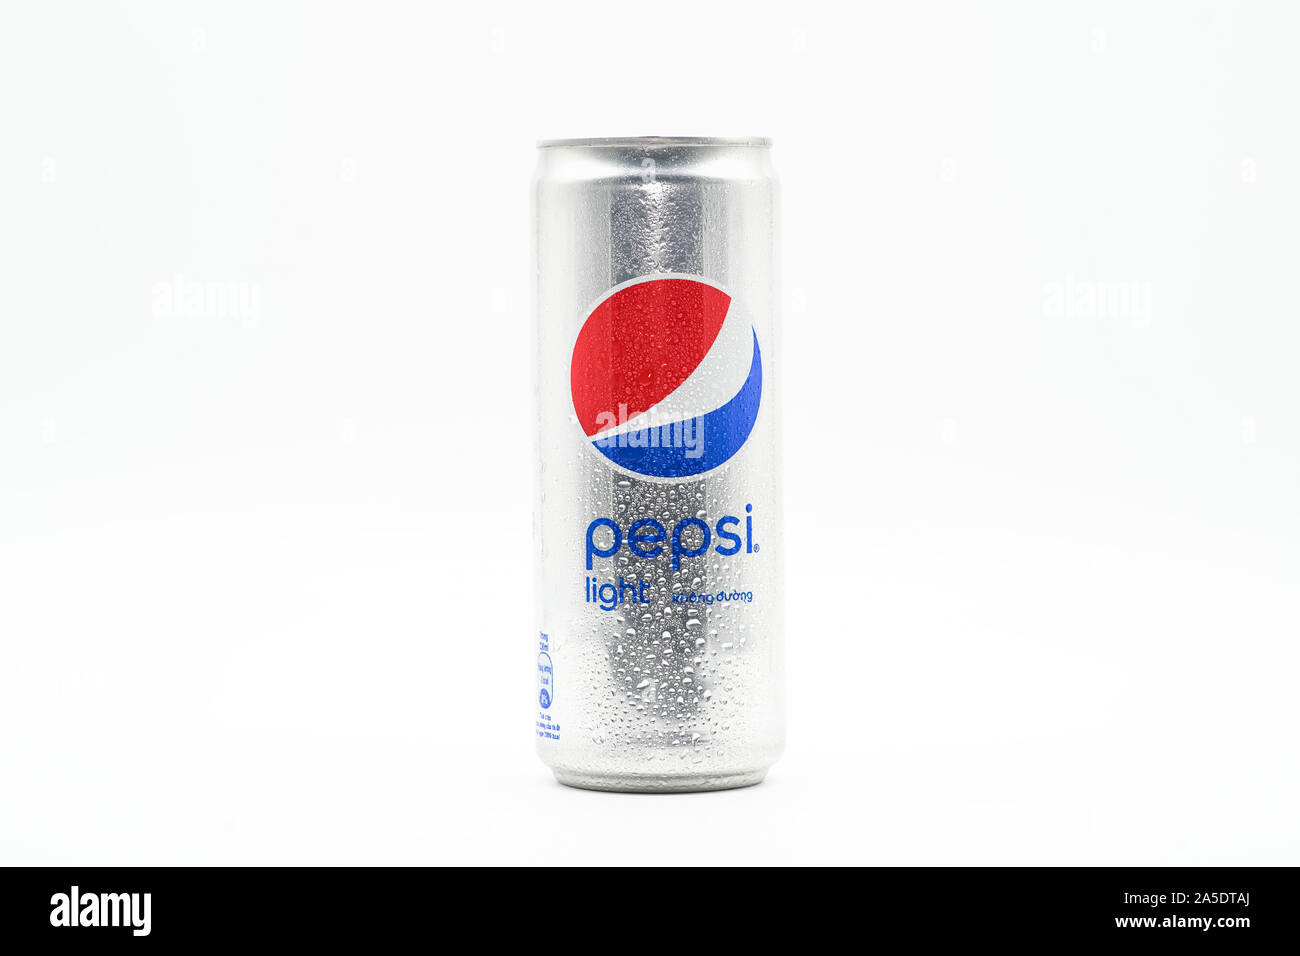 Vietnamese Pepsi can bottle isolated on white background. Tuesday 12 February, Ho Chi Minh City, Vietnam Stock Photo